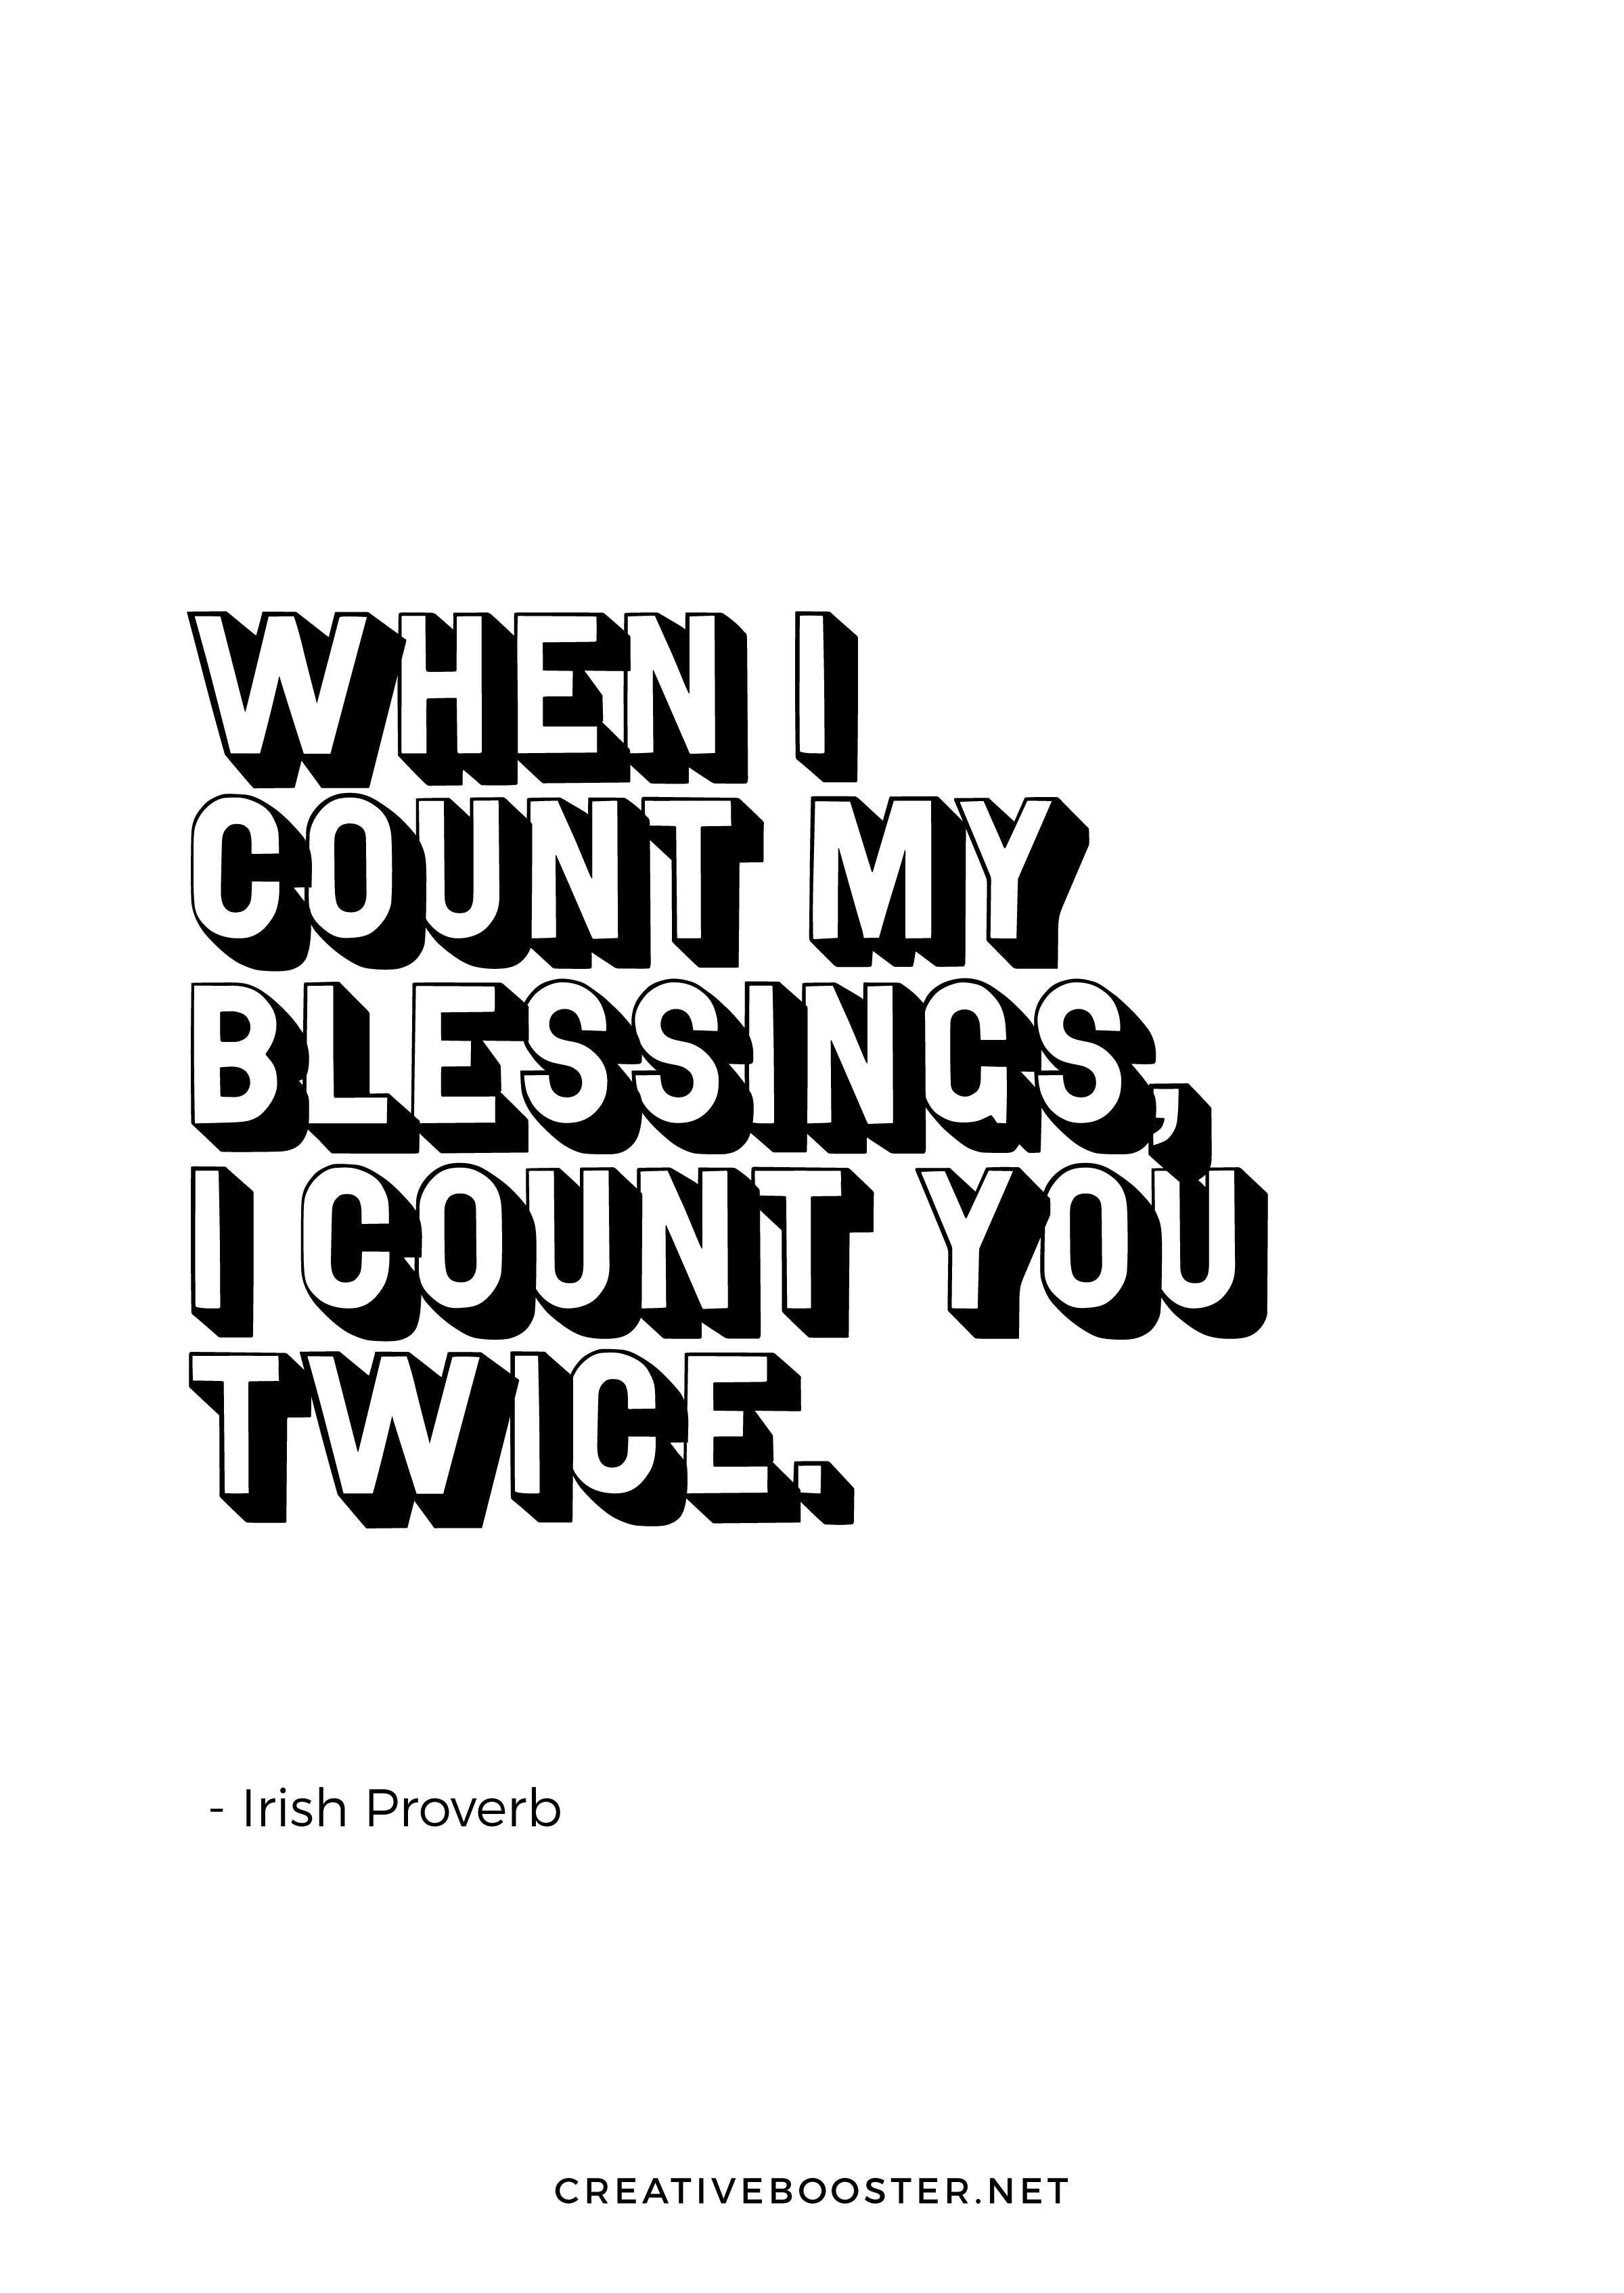 "When I count my blessings, I count you twice." — Irish Proverb